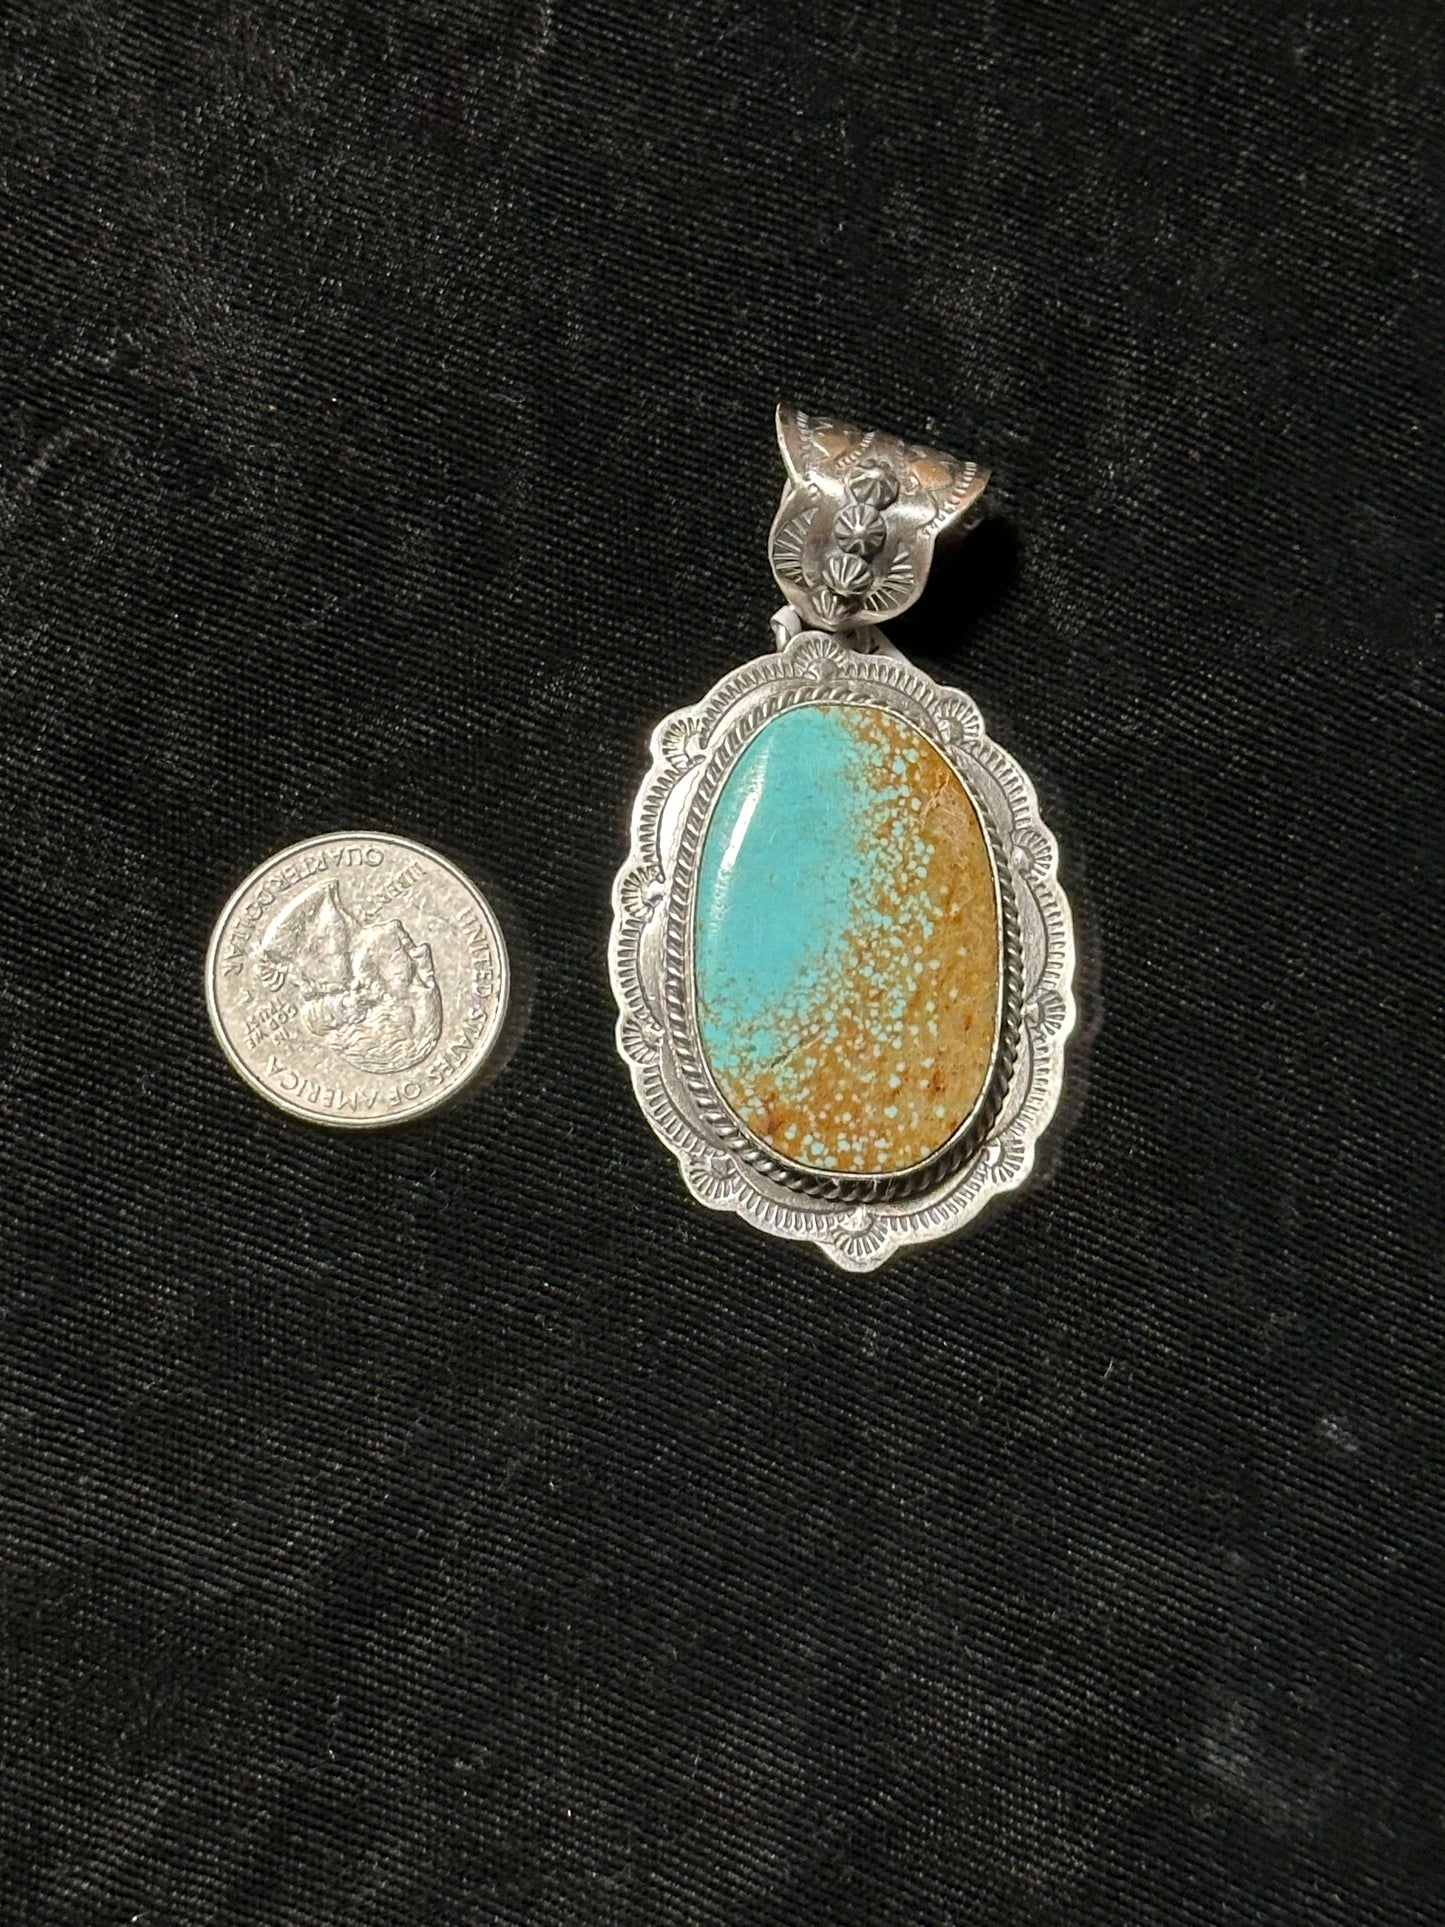 #8 Turquoise Pendant 11mm bale by J. Nelson, Navajo